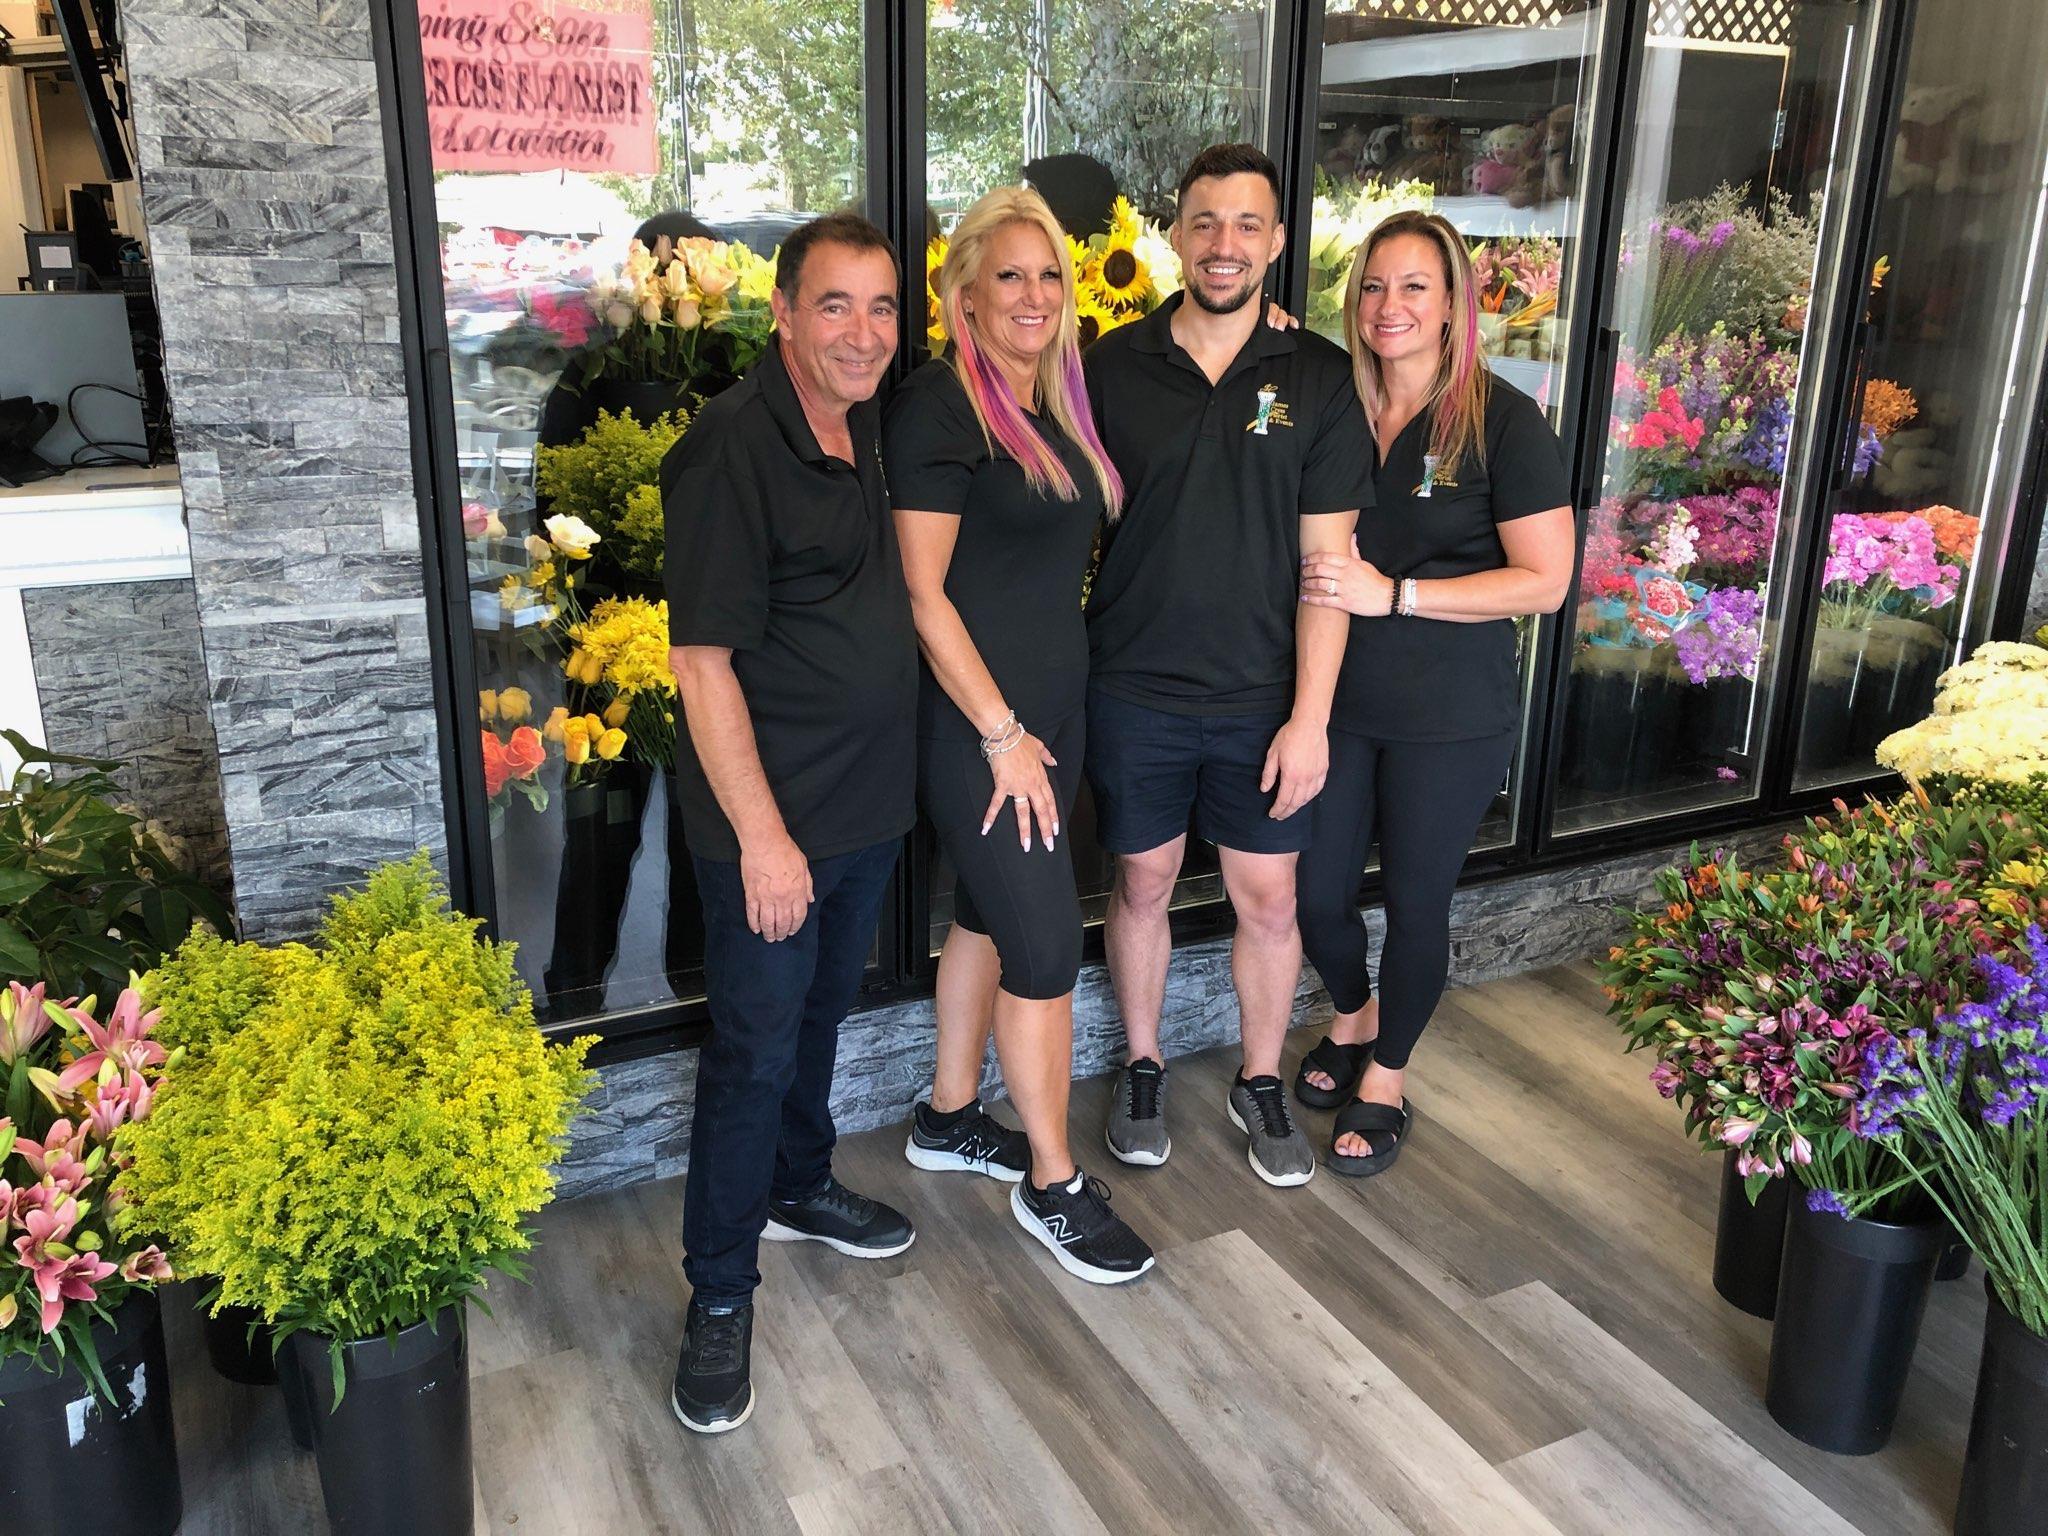 James Cress Florist Smithtown Location picture of owners